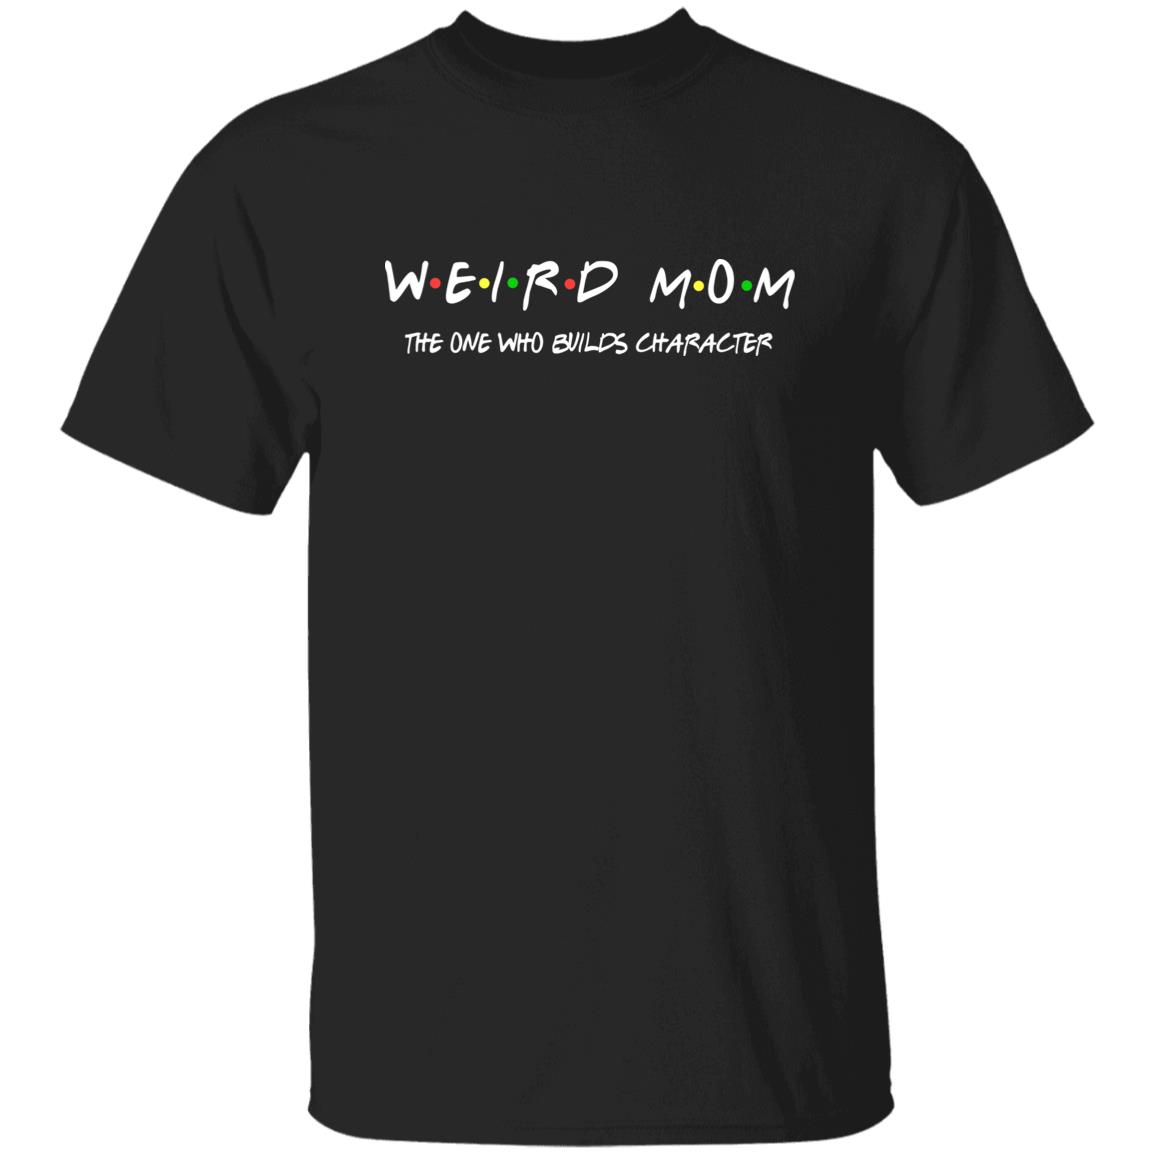 Weird Moms Build Character Funny Shirt For Mother's Day Gift